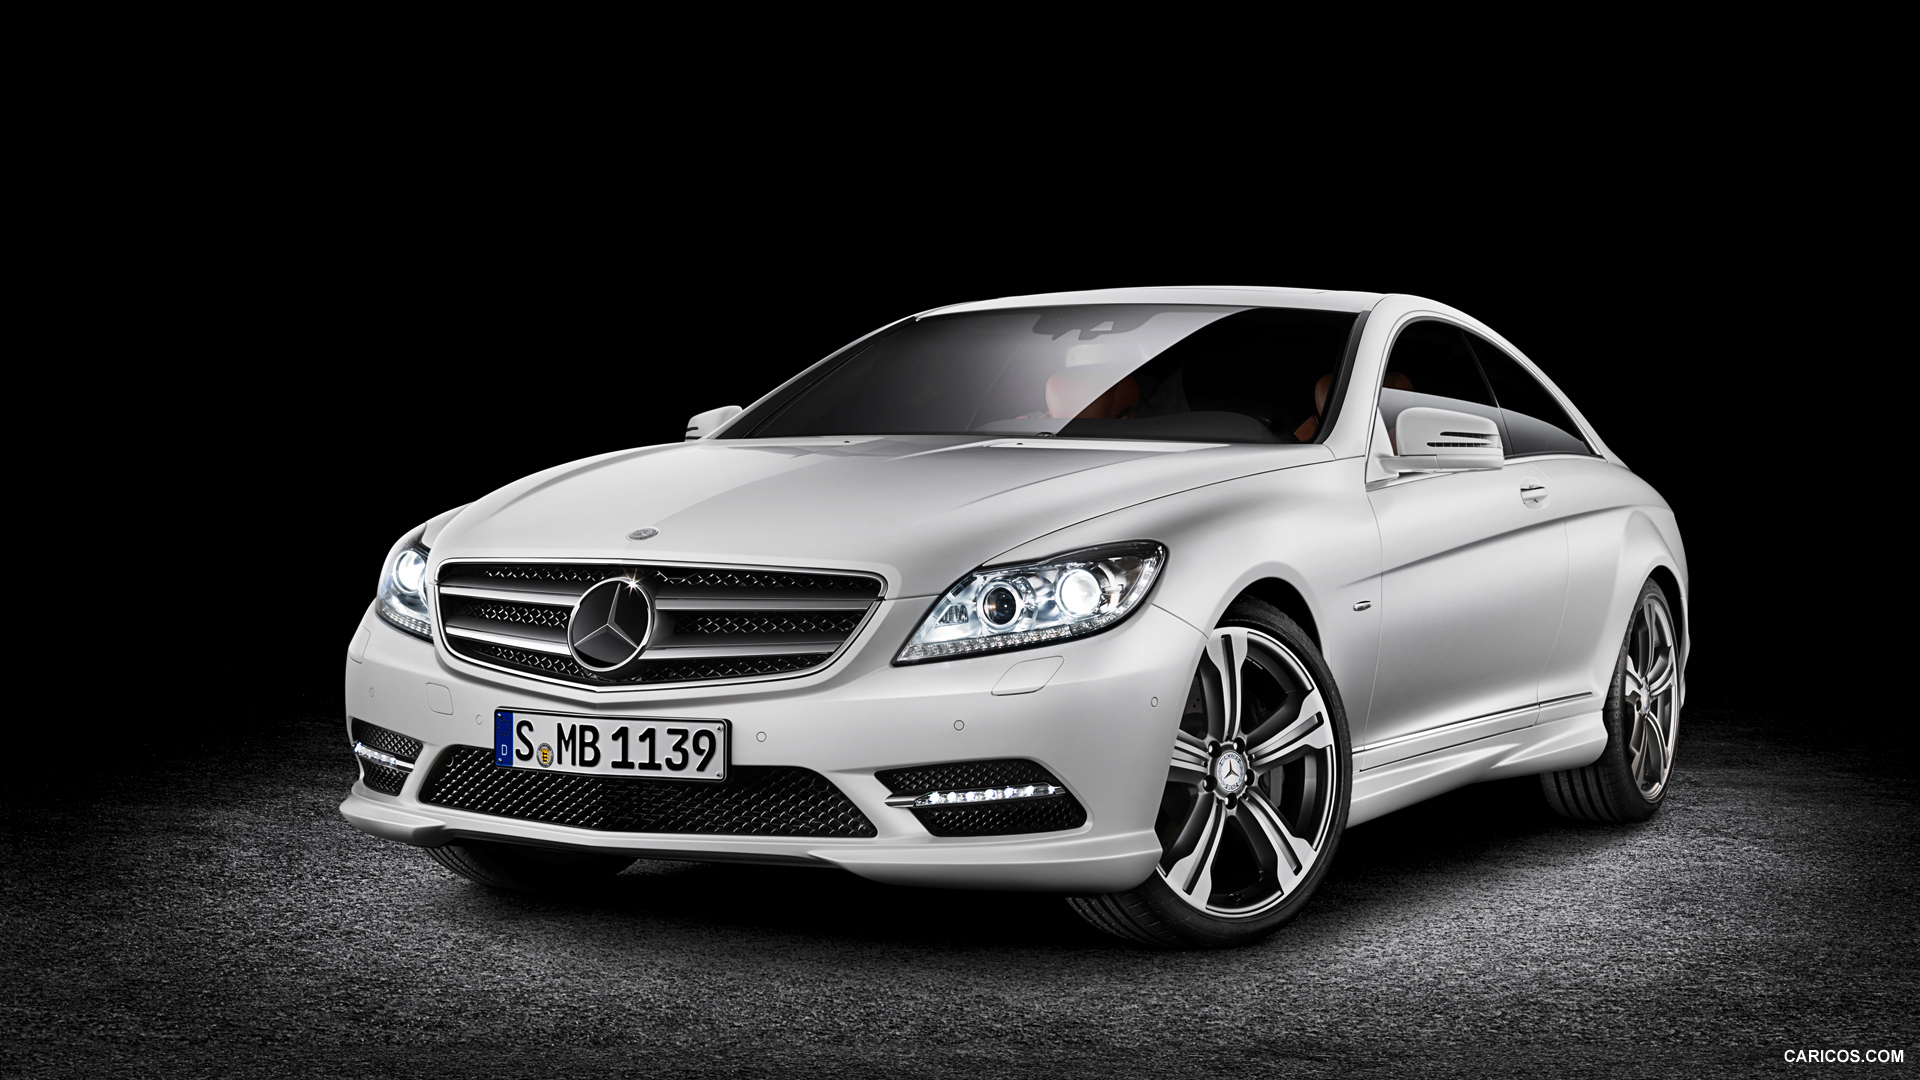 2012 Mercedes-Benz CL-Class "Grand Edition" - Front, #1 of 2